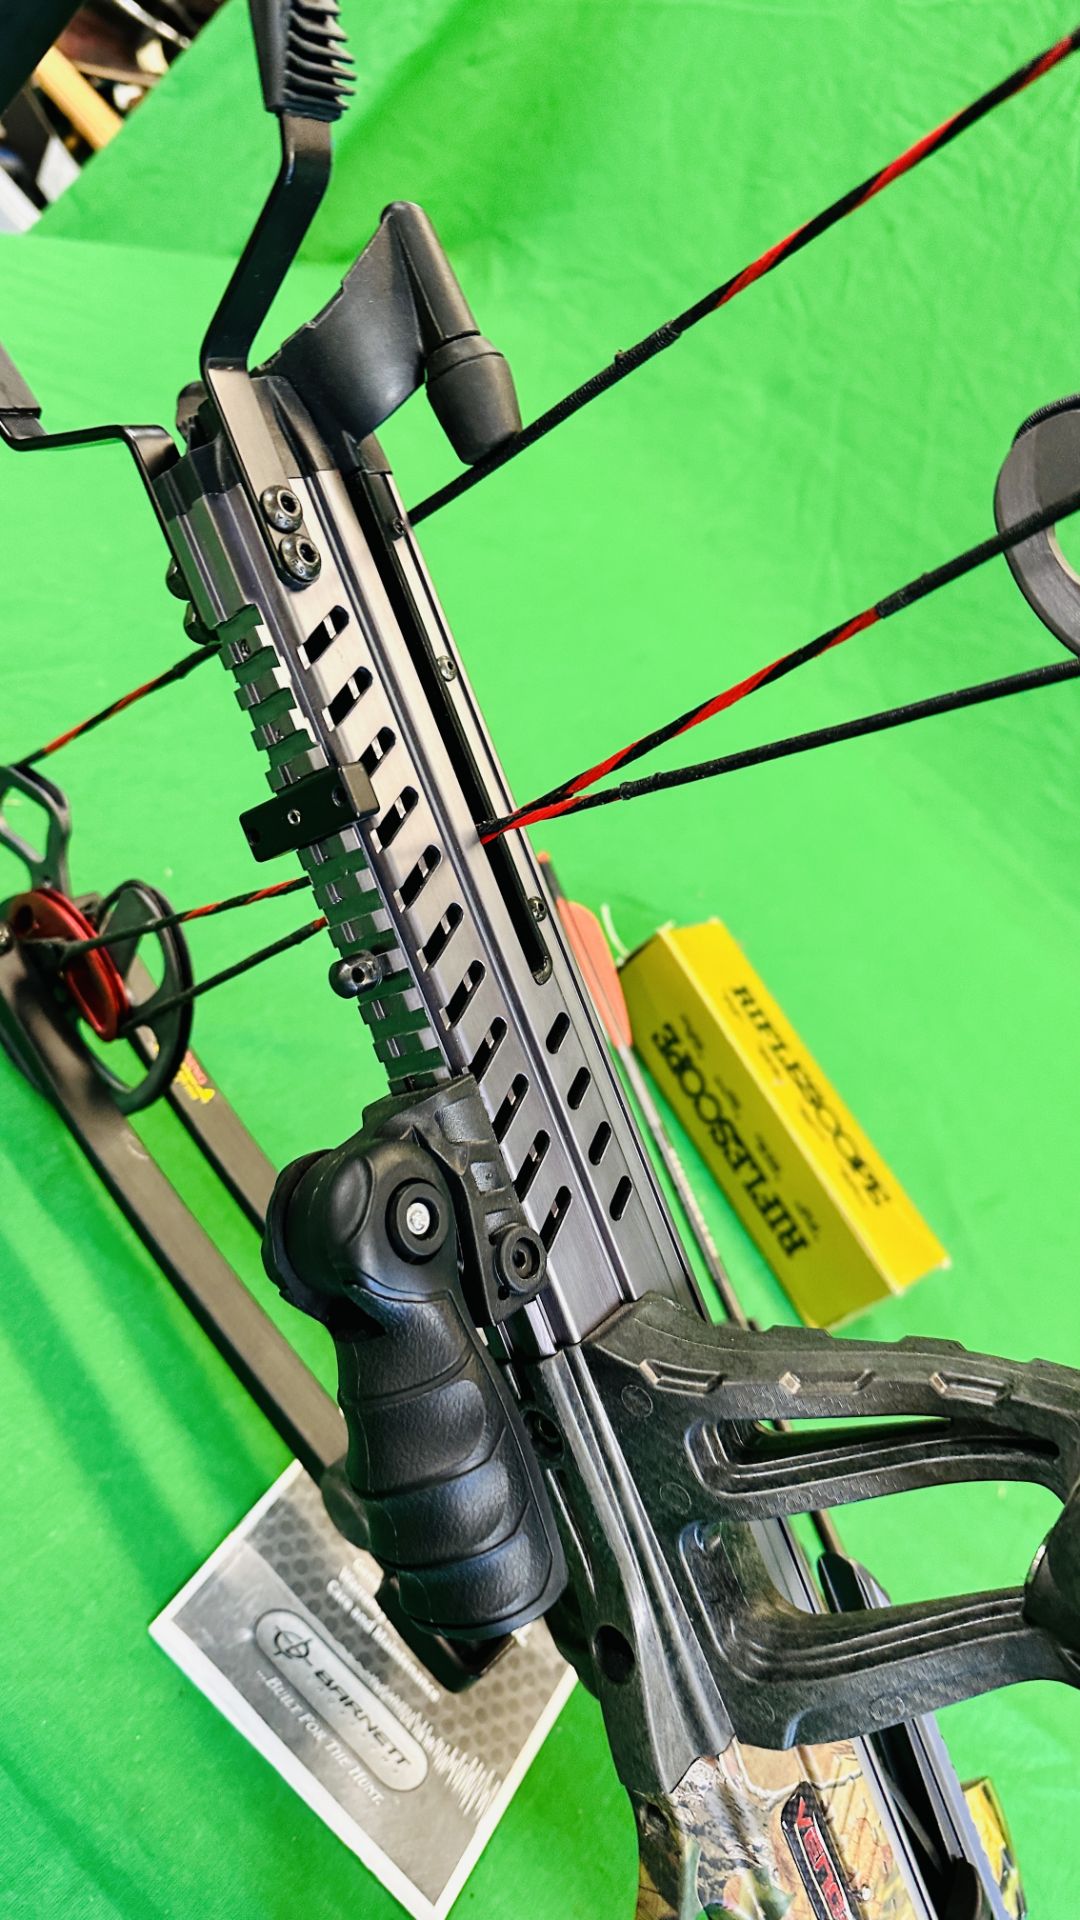 BARNETT "VENGANCE" COMPOUND CROSSBOW COMPLETE WITH THREE CARBON FIBRE CROSSBOW BOLTS, QUIVER, - Image 29 of 35